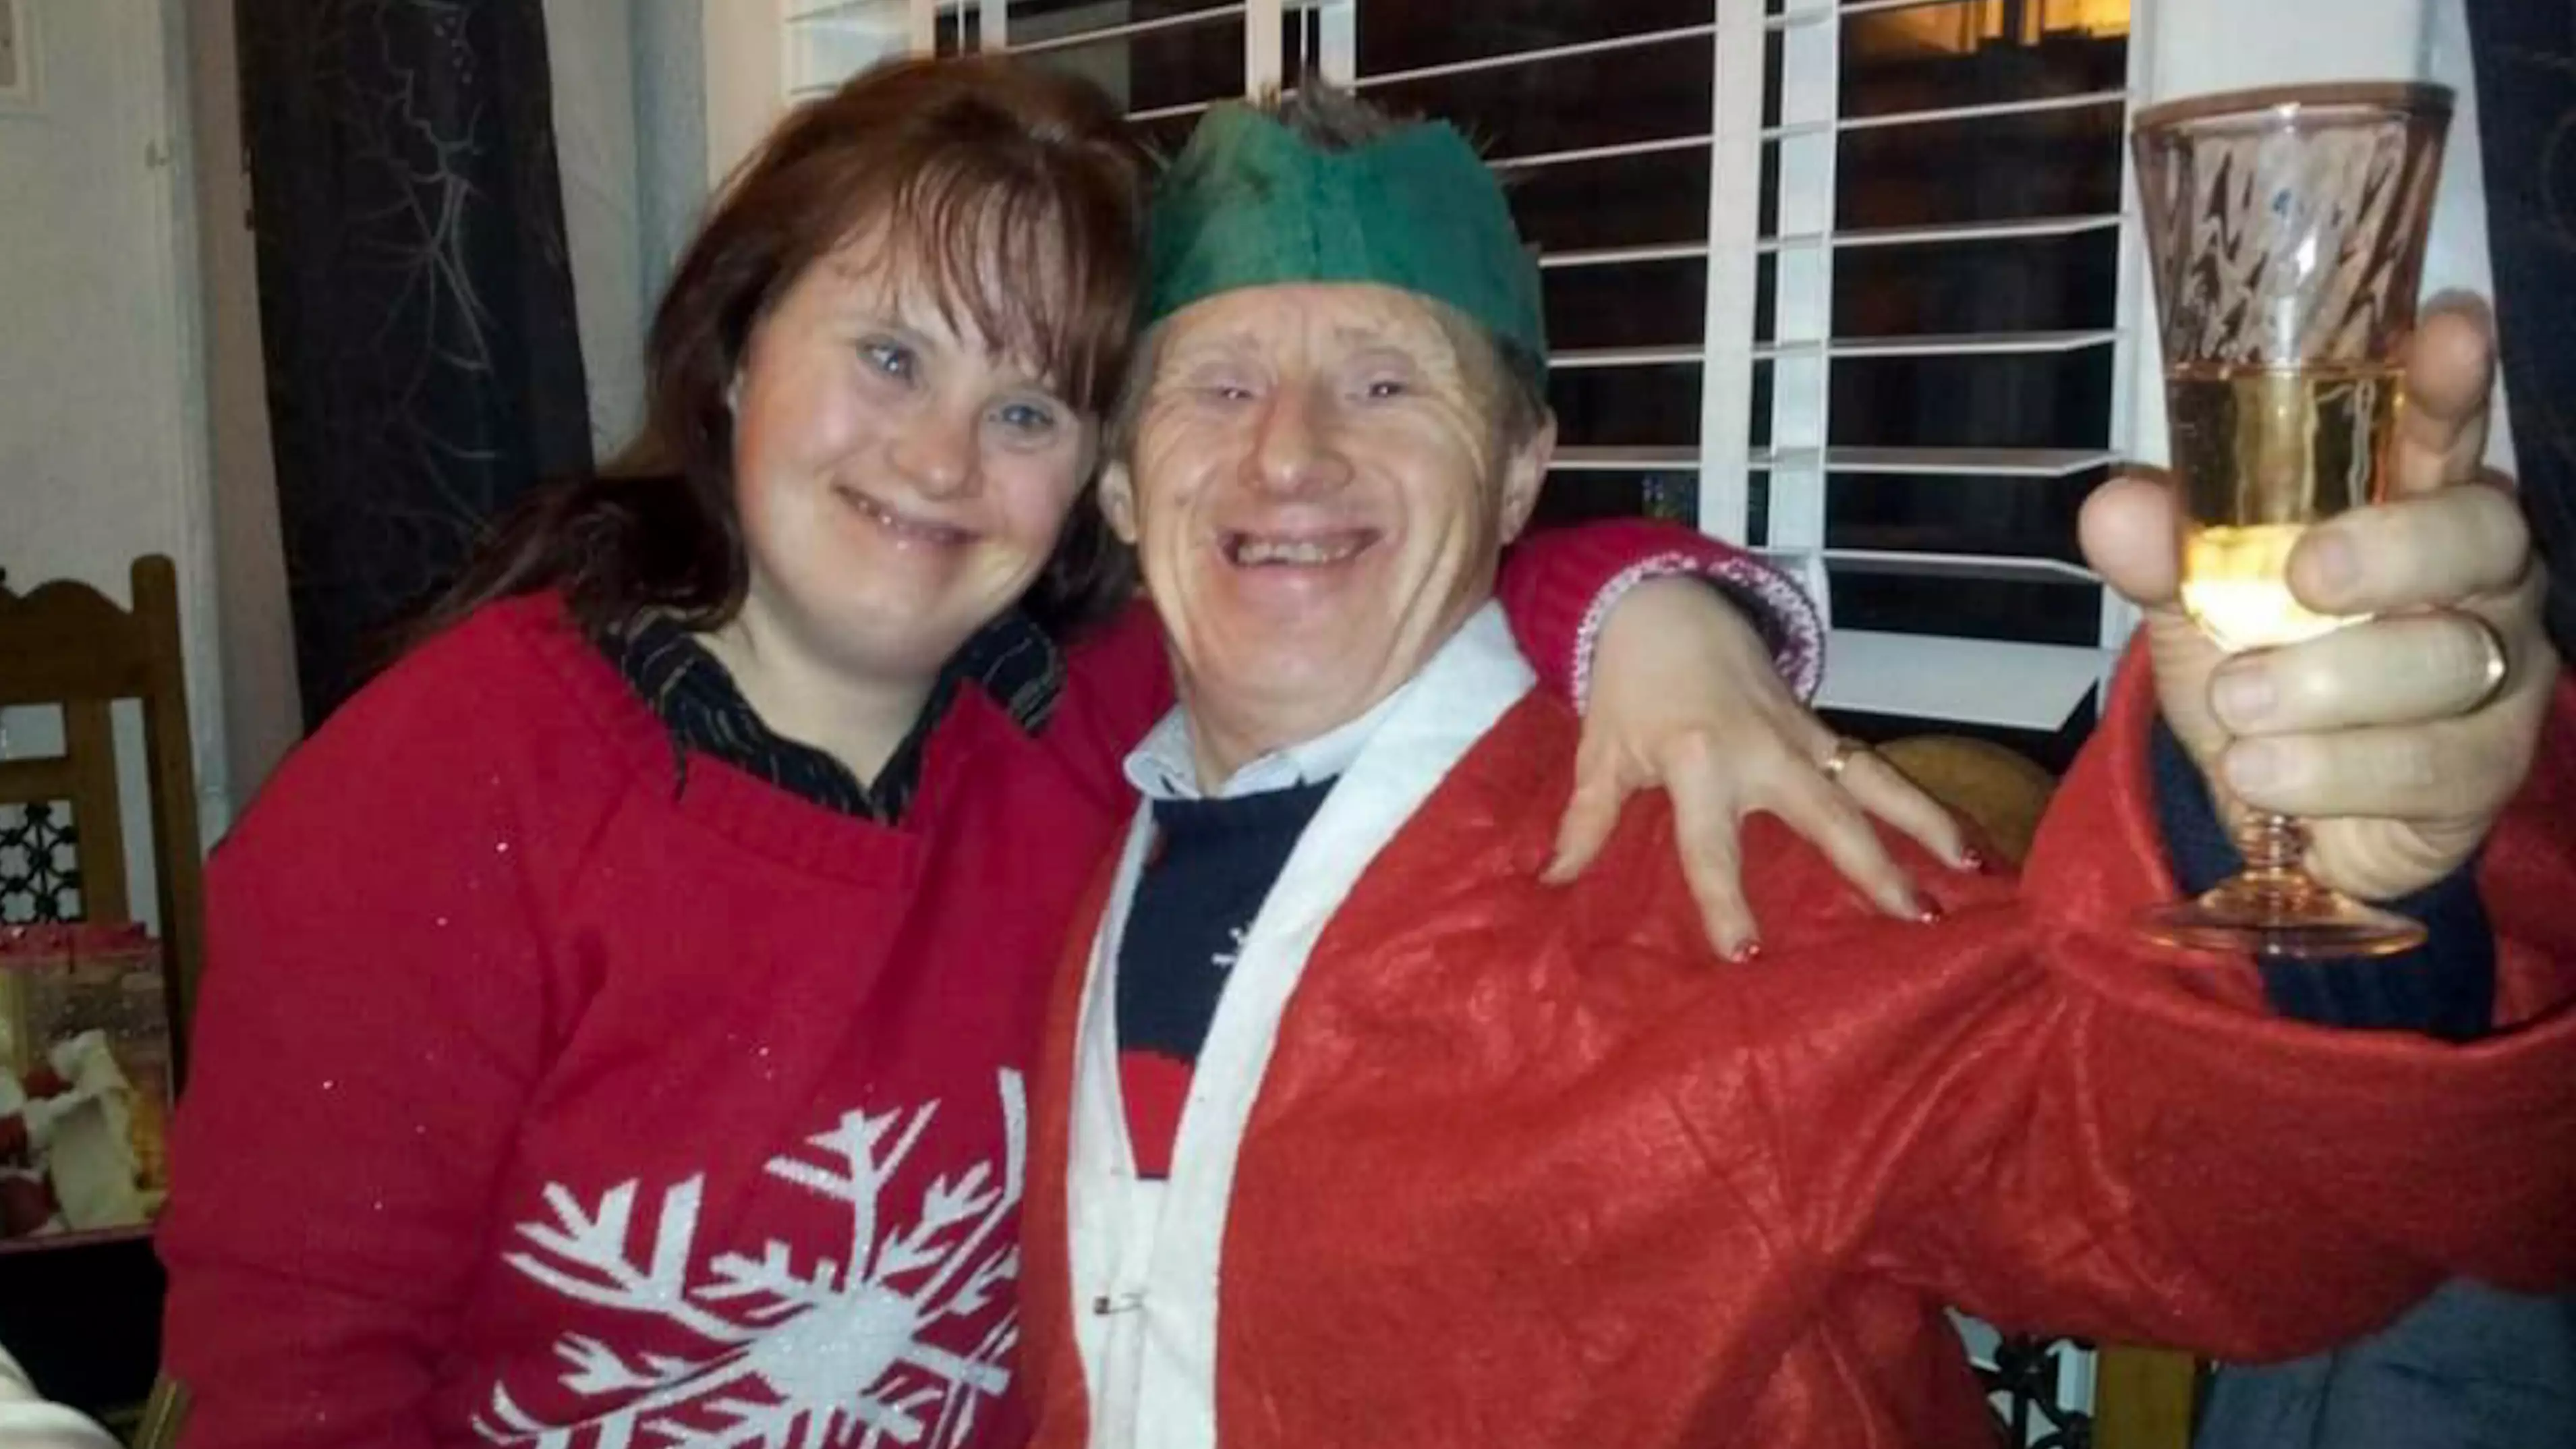 Carer Asks Strangers To Post Christmas Cards To Down's Syndrome Couple To Cheer Them Up